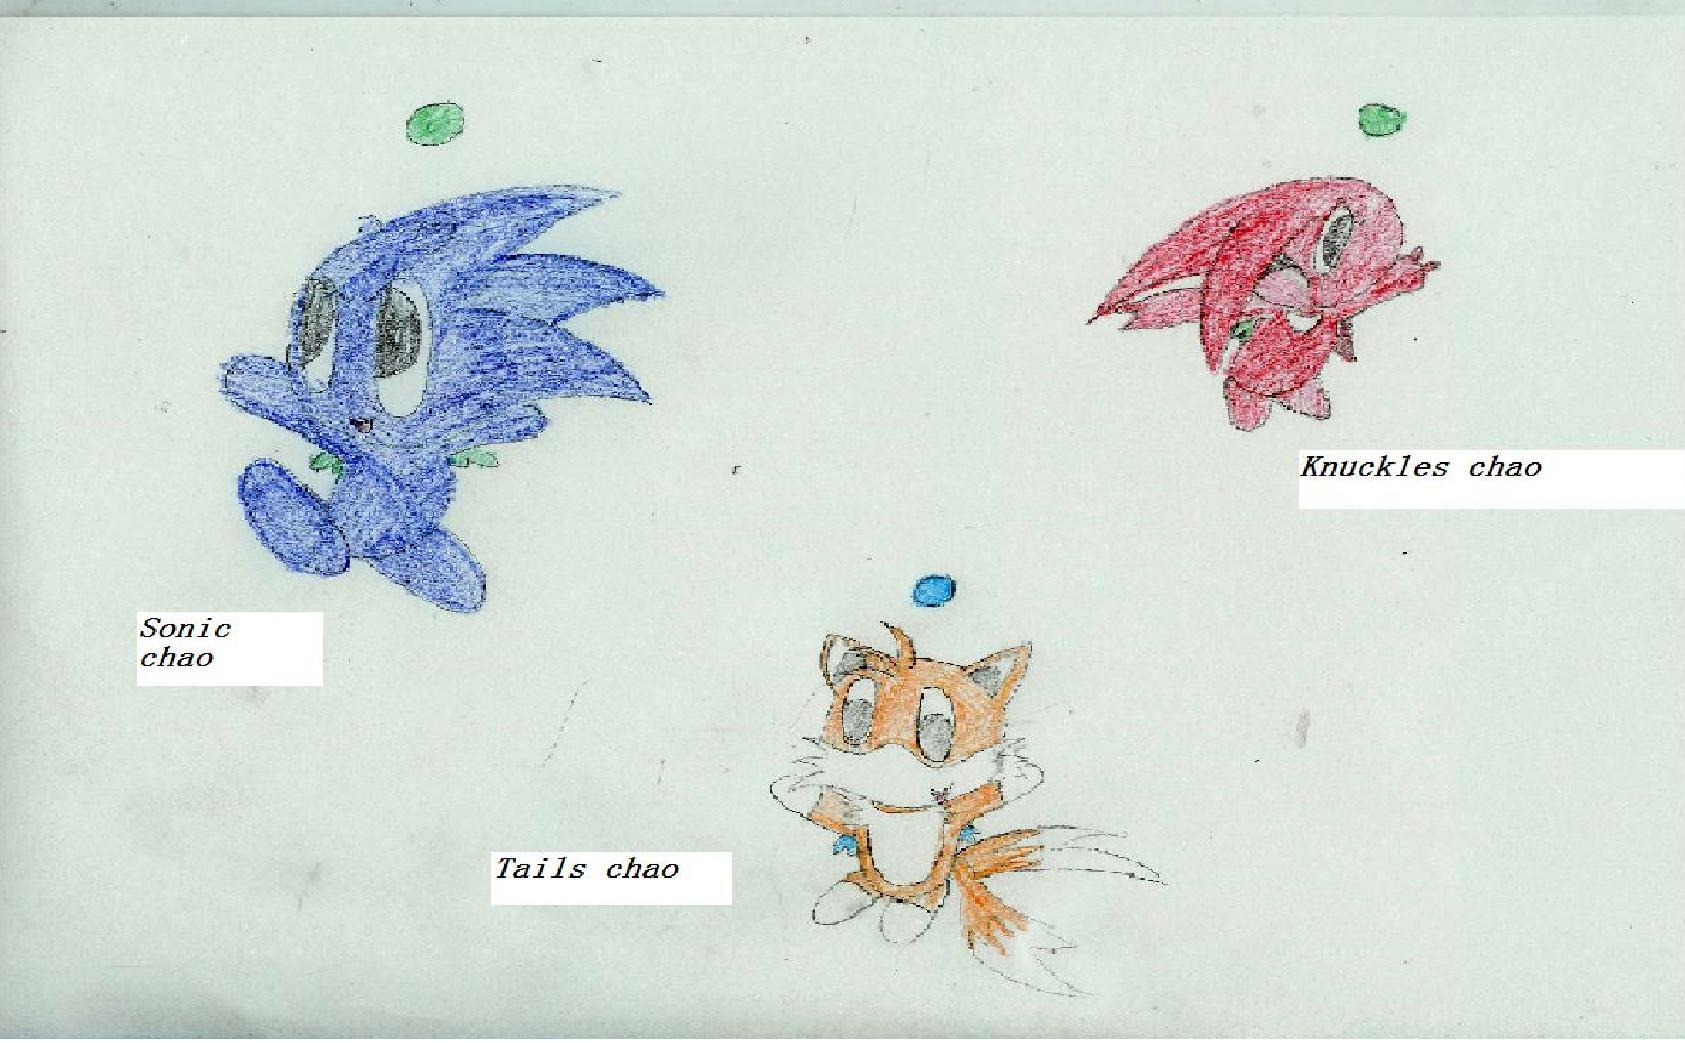 Team sonic chao (cropped) by Knuckles_prower168